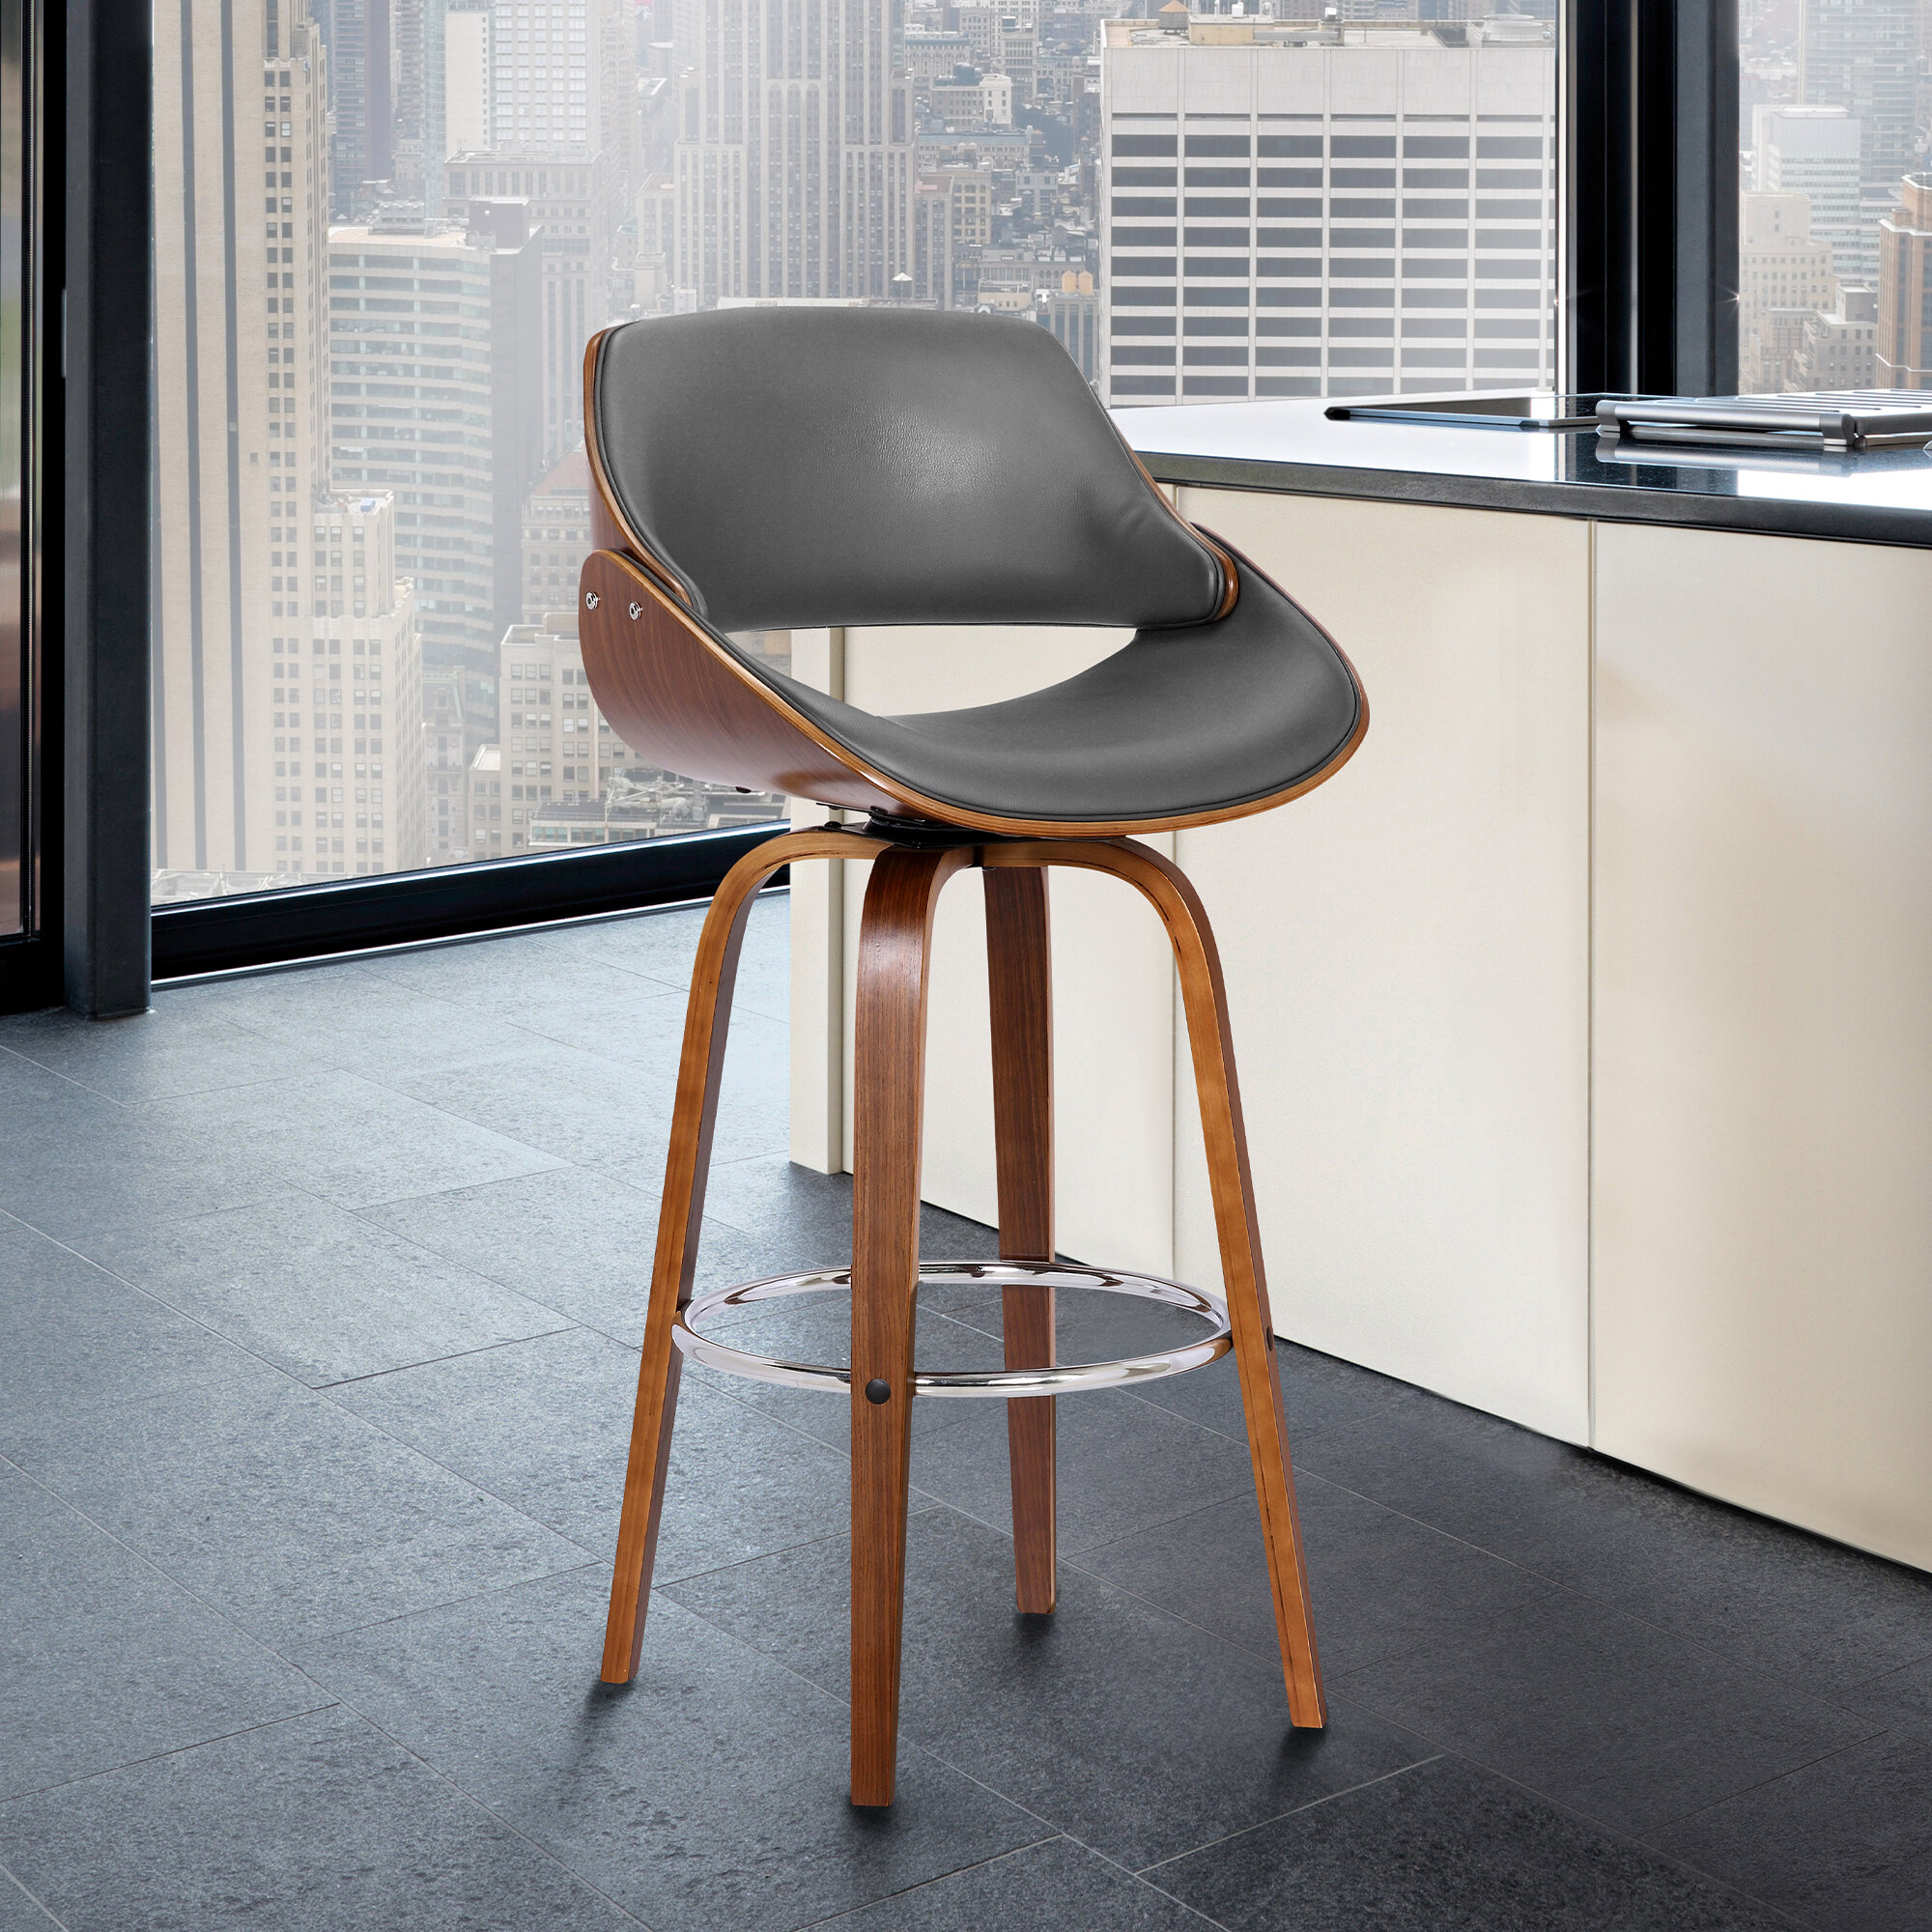 Professional High Quality 30 Inch Seat Height Wood and Leather Swivel Stool 